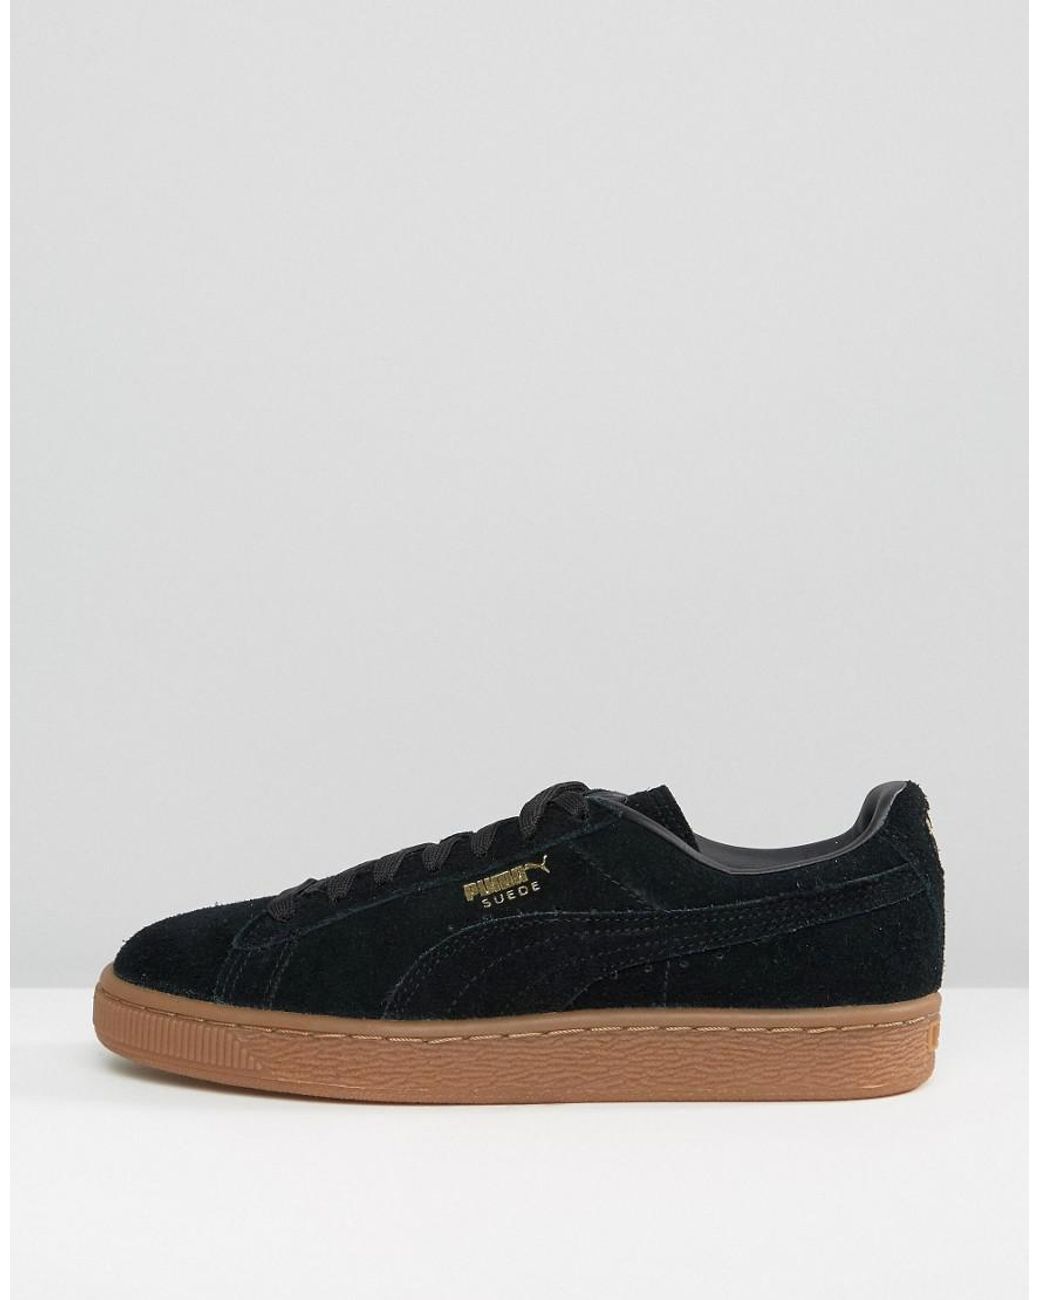 PUMA Black Suede Classic Trainers With Gum Sole | Lyst UK